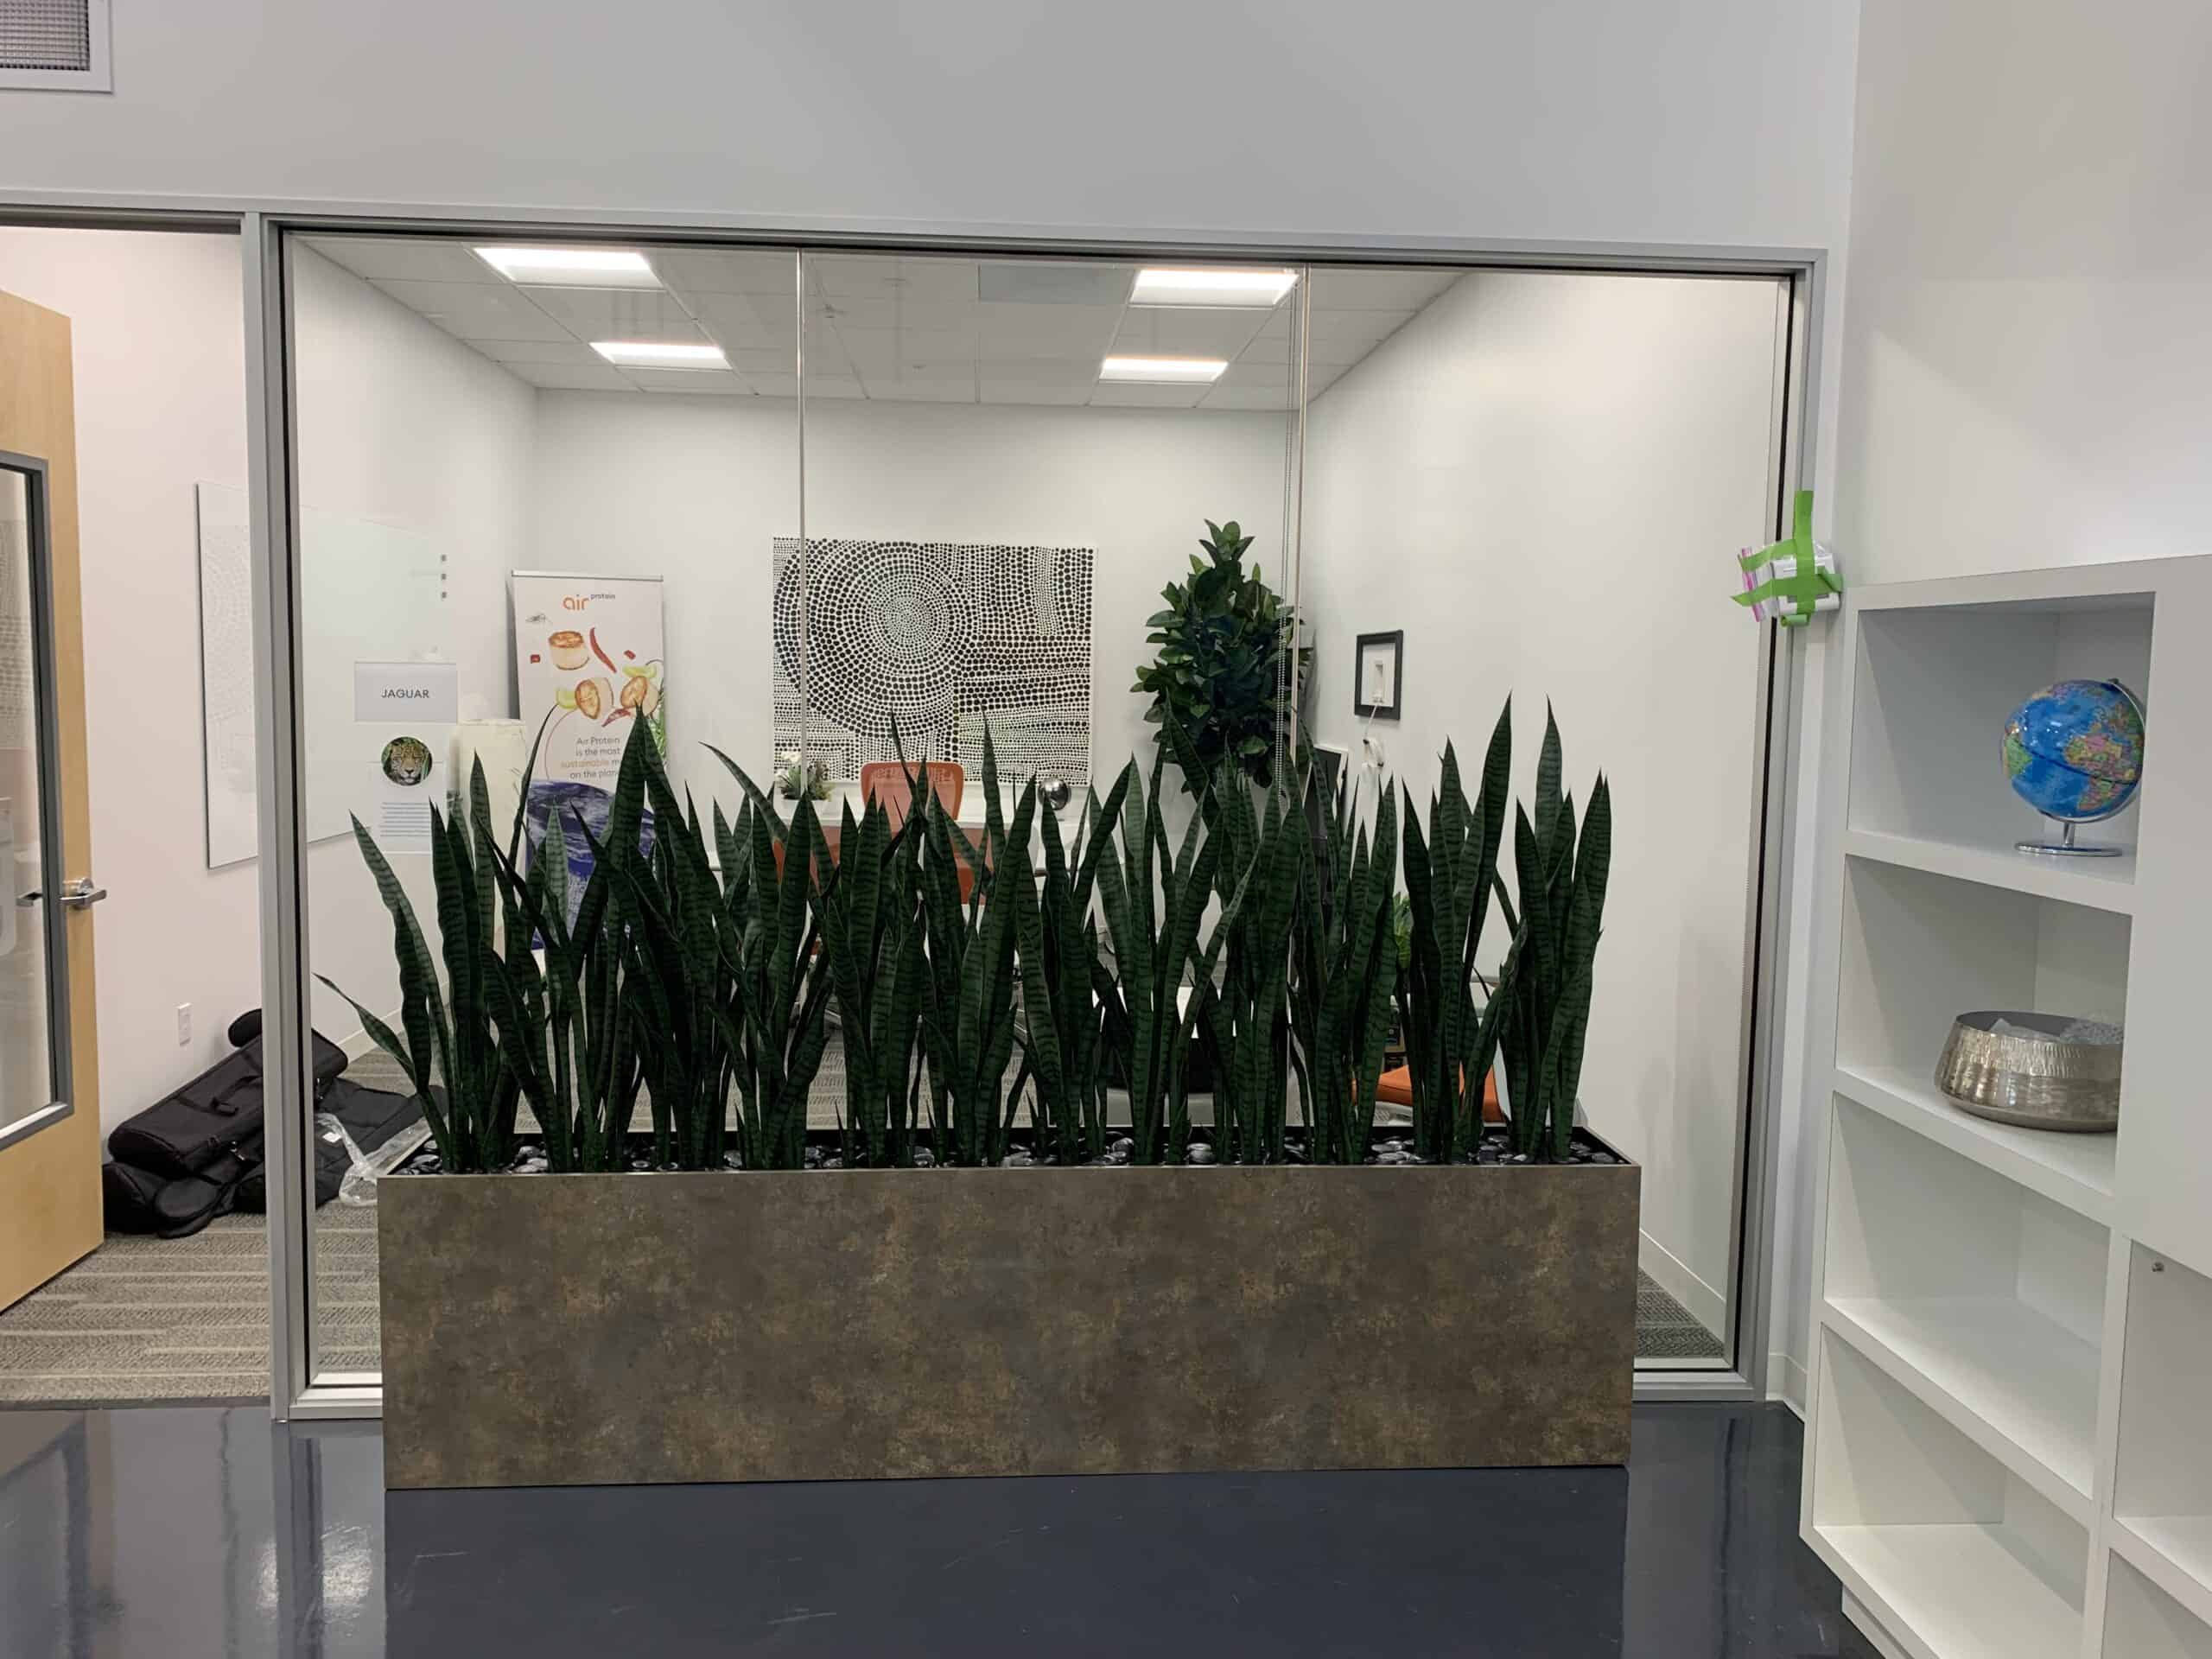 4 ft Sansevieria if front of office for privacy